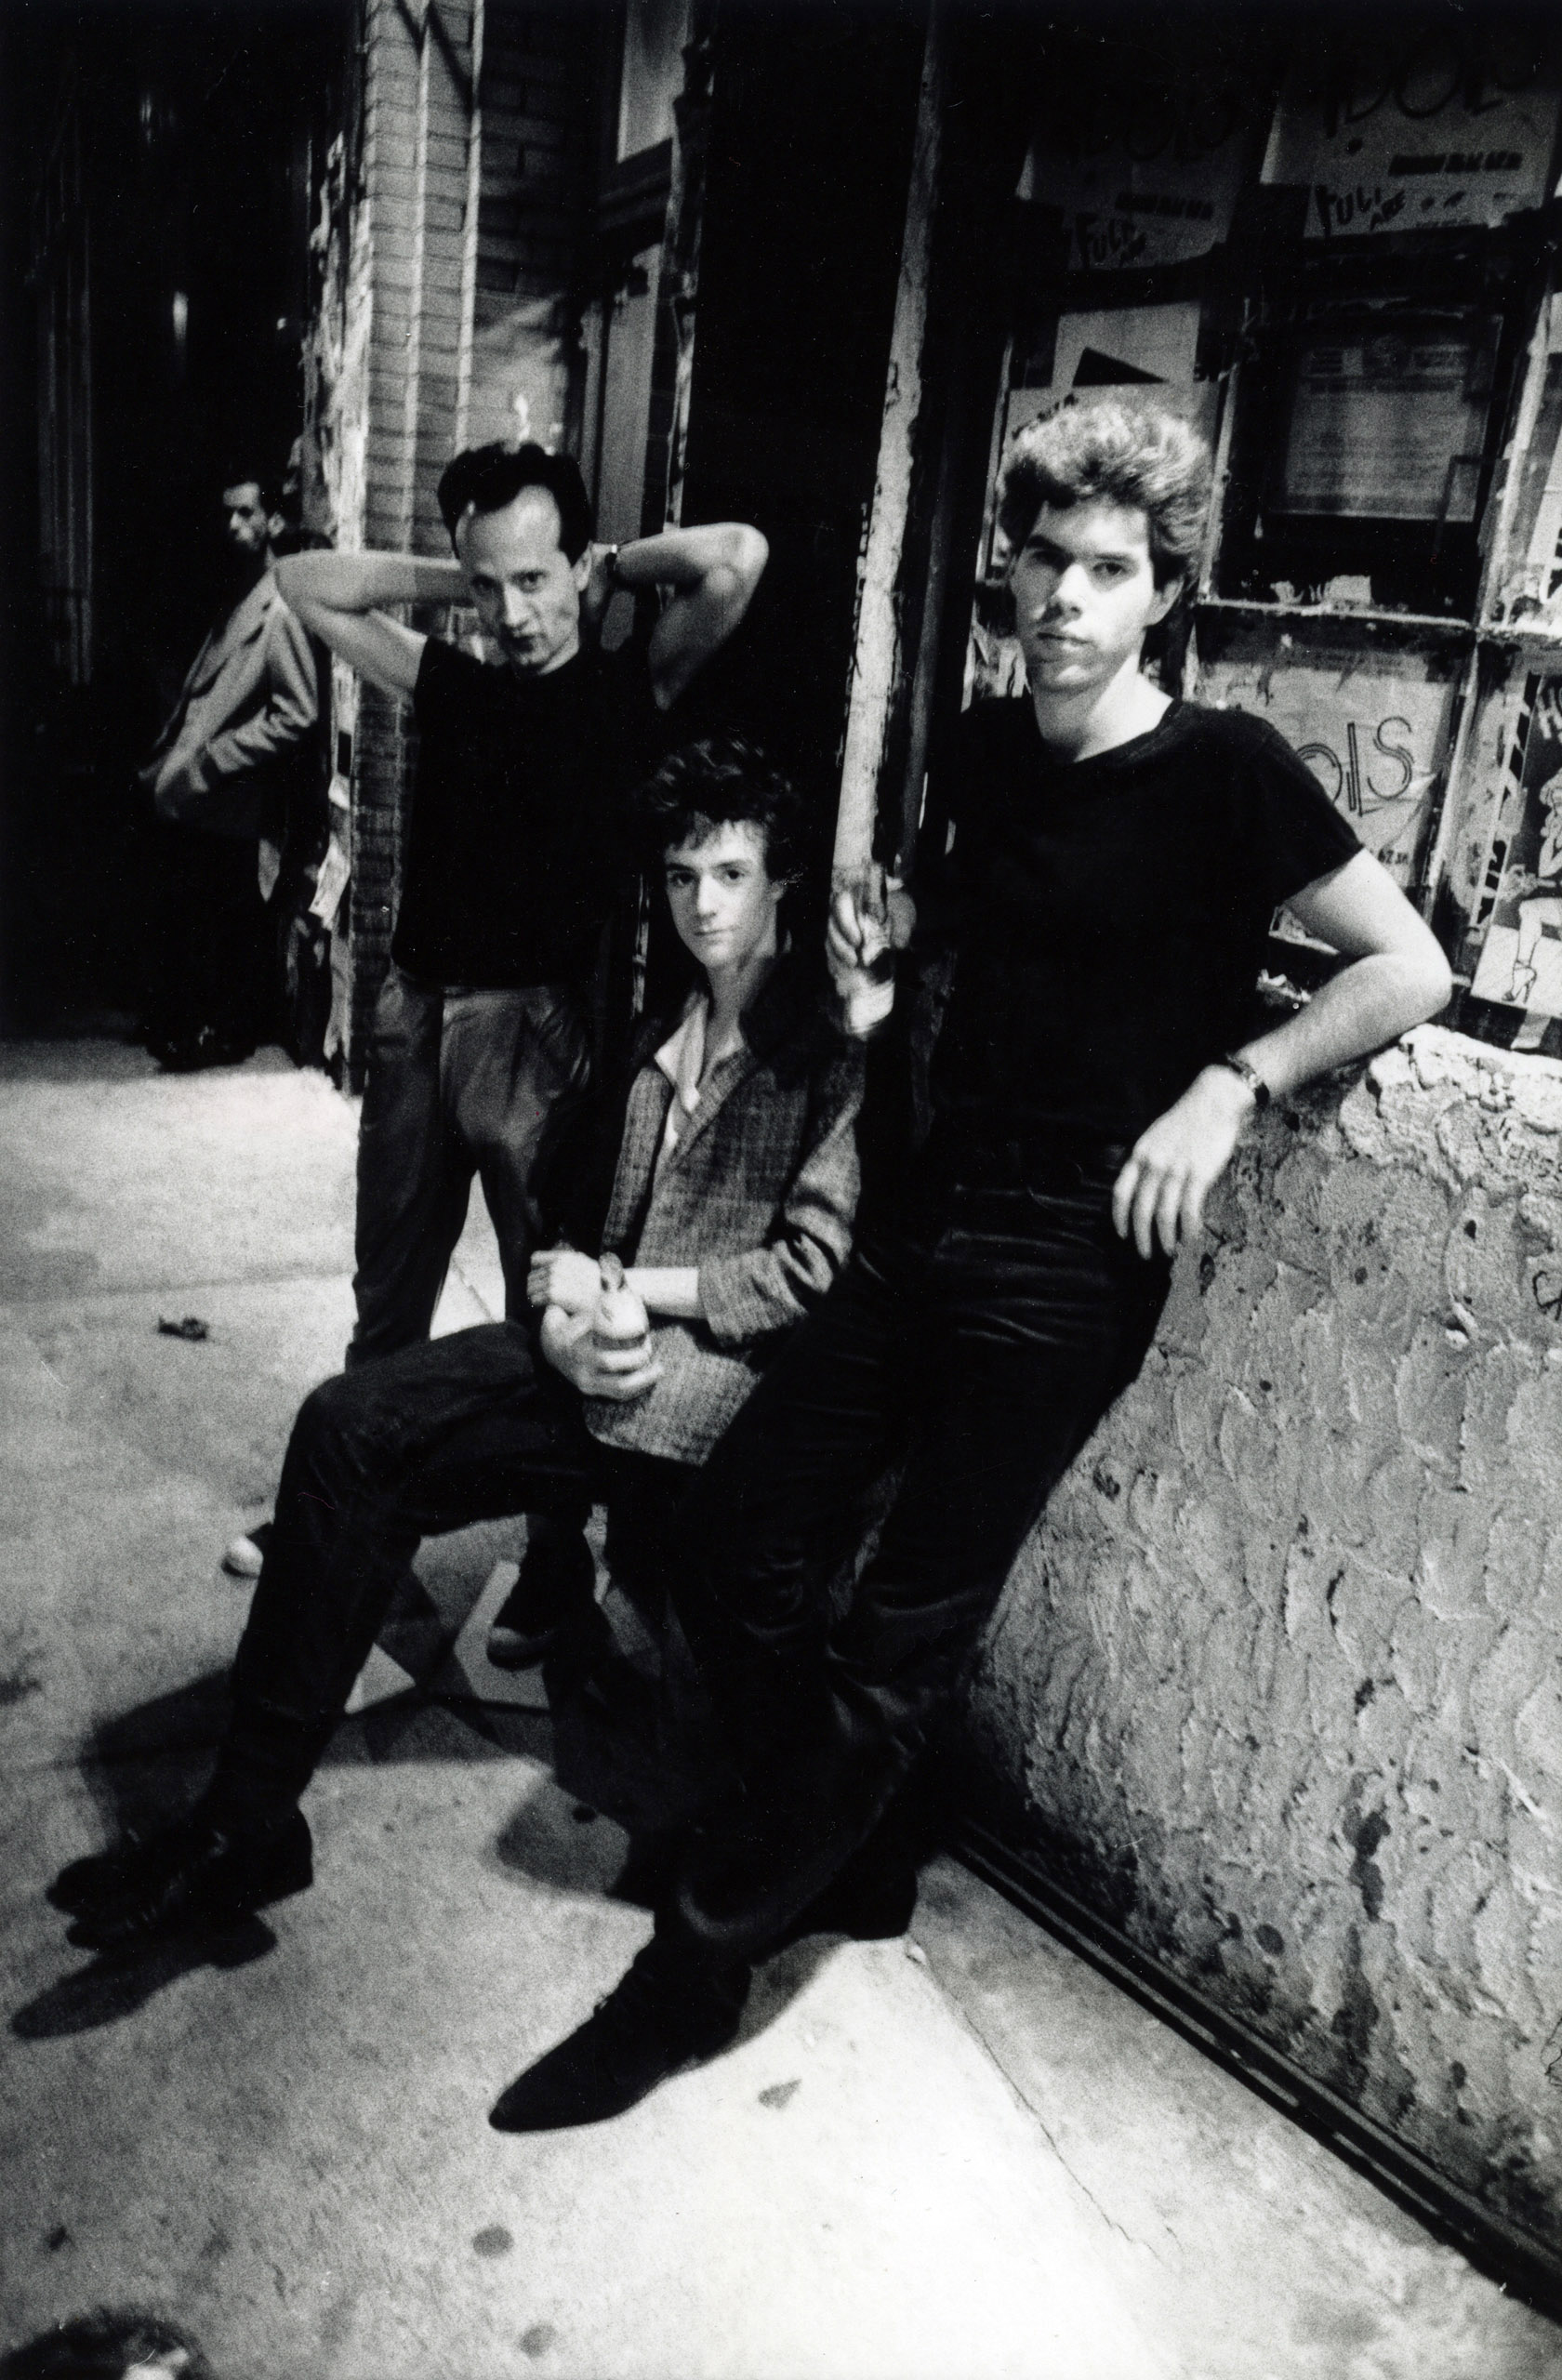 Klaus Nomi, Christopher Parker, and Jim Jarmusch, Bowery, 1978.